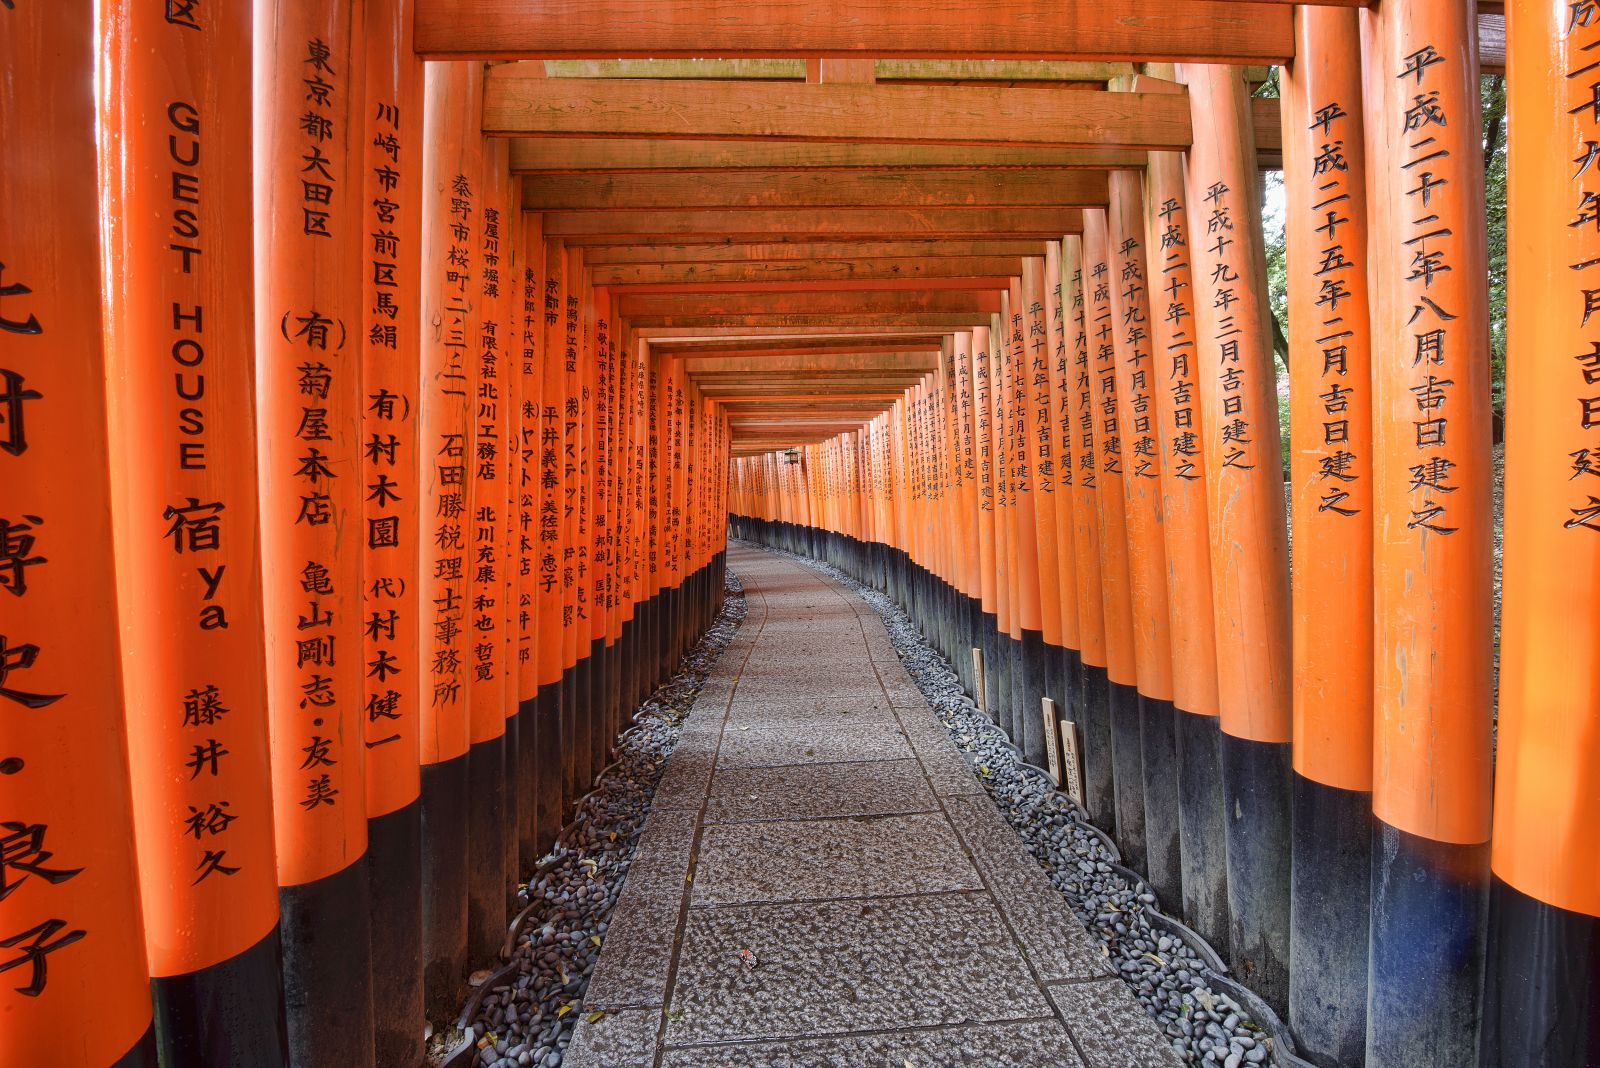 A week in Kyoto, Japan’s city of temples